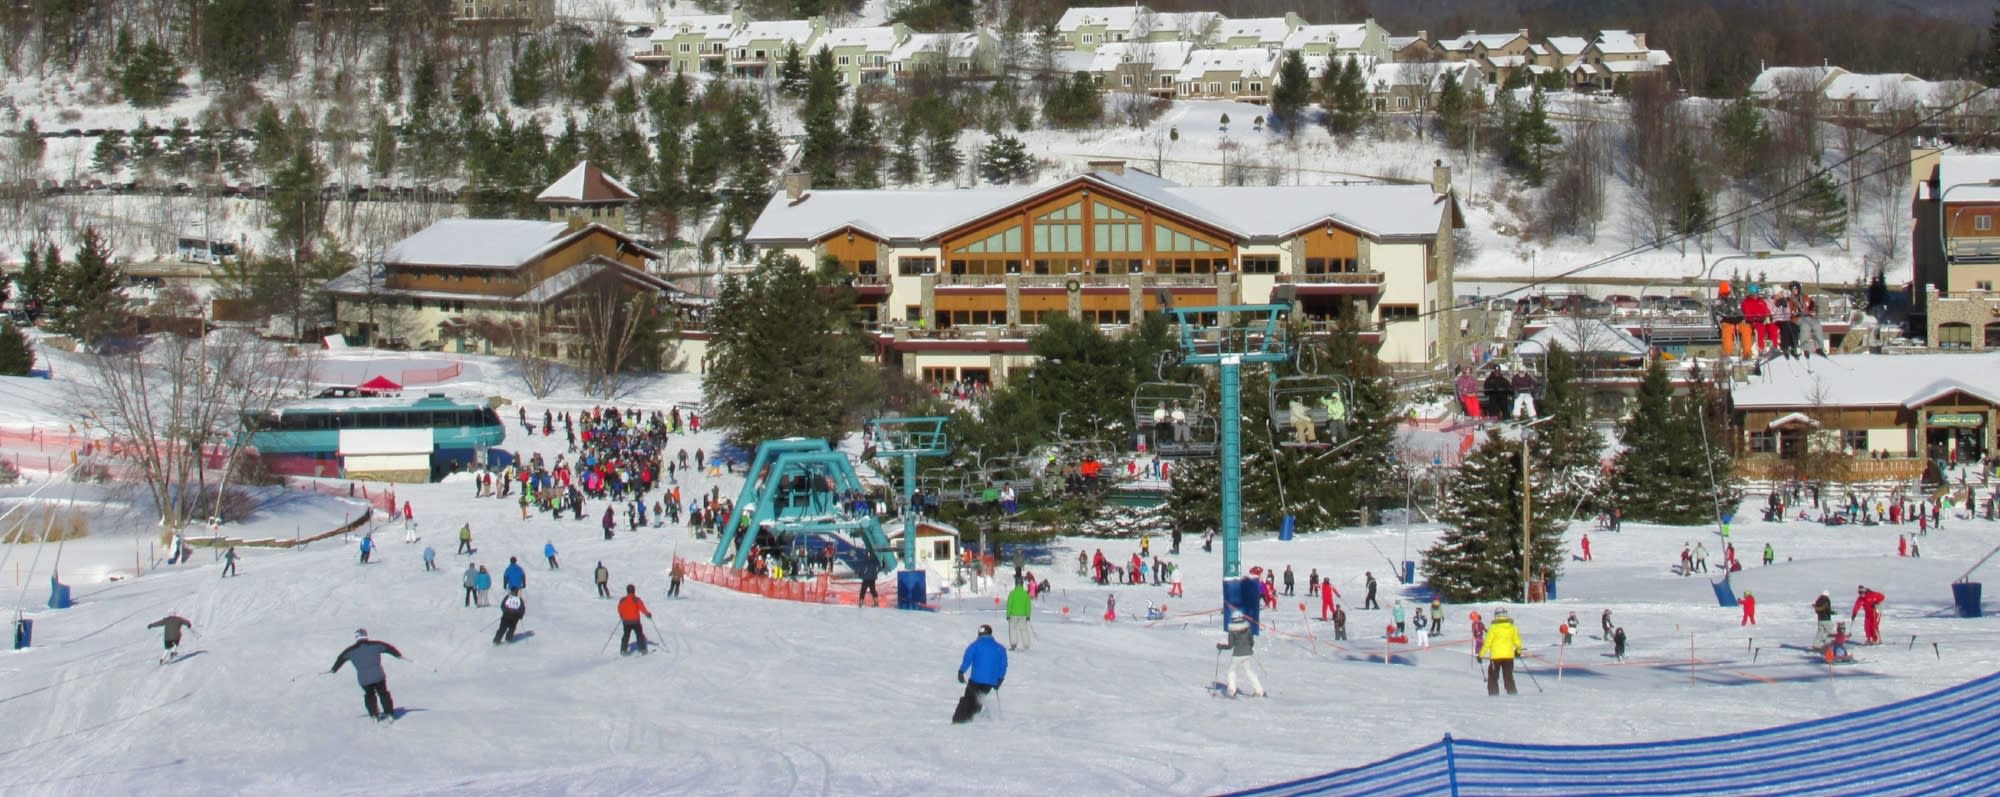 Holiday Valley - Ellicottville